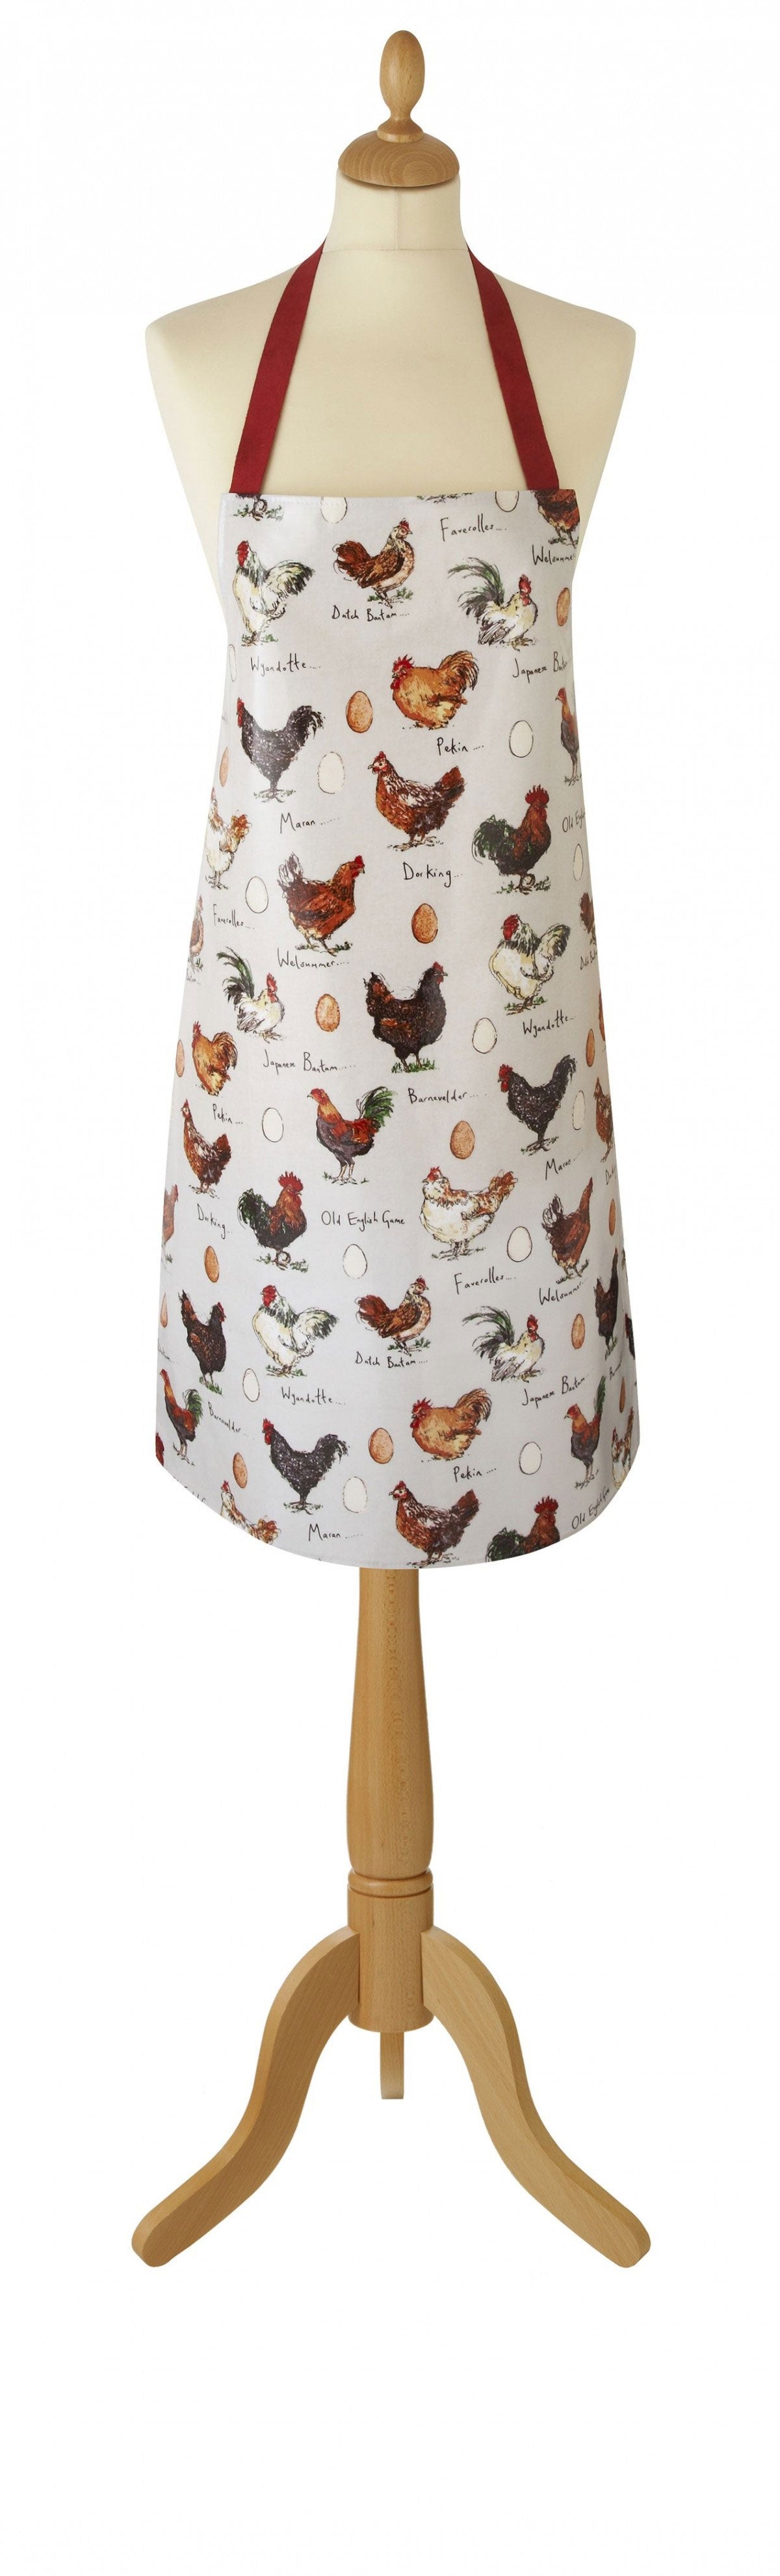 Ulster Weavers Cotton Apron Chicken & Egg